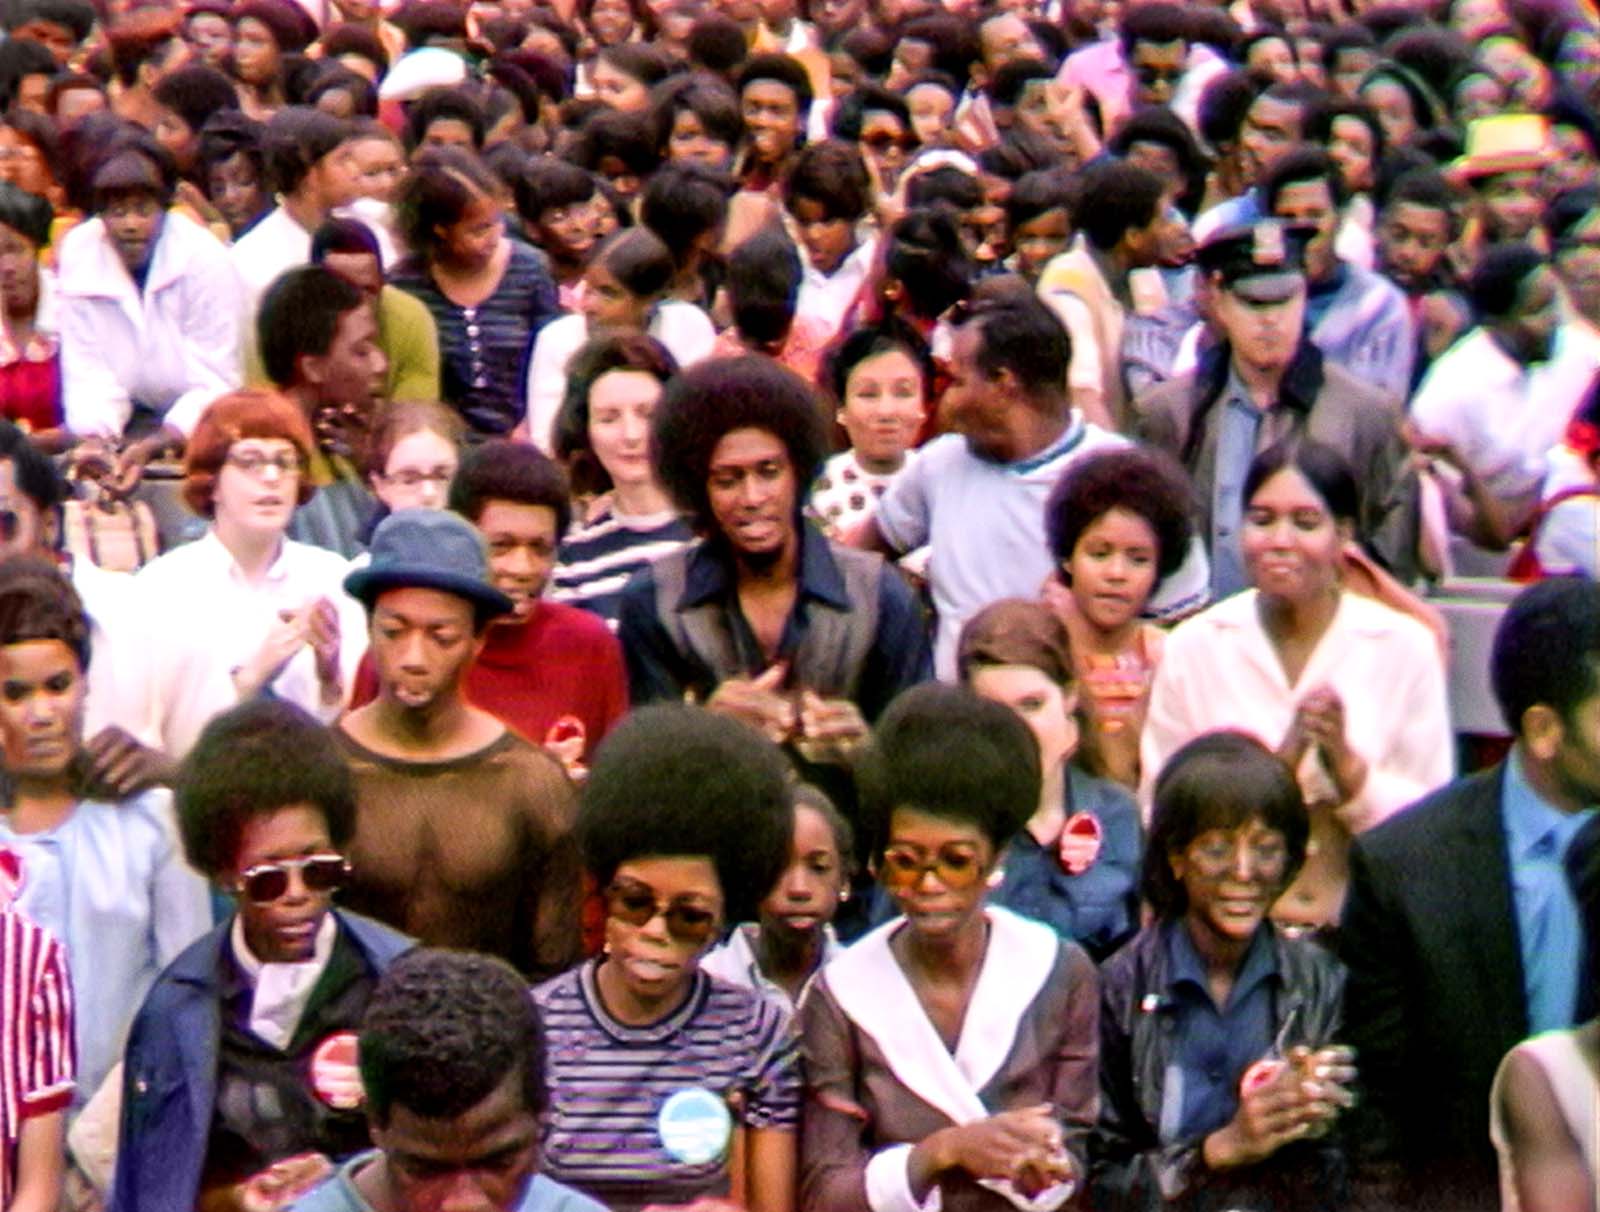 50,000 people attended the 1969 Harlem Cultural Festival, but it never reached broadcast TV. Image © 20th Century Studios